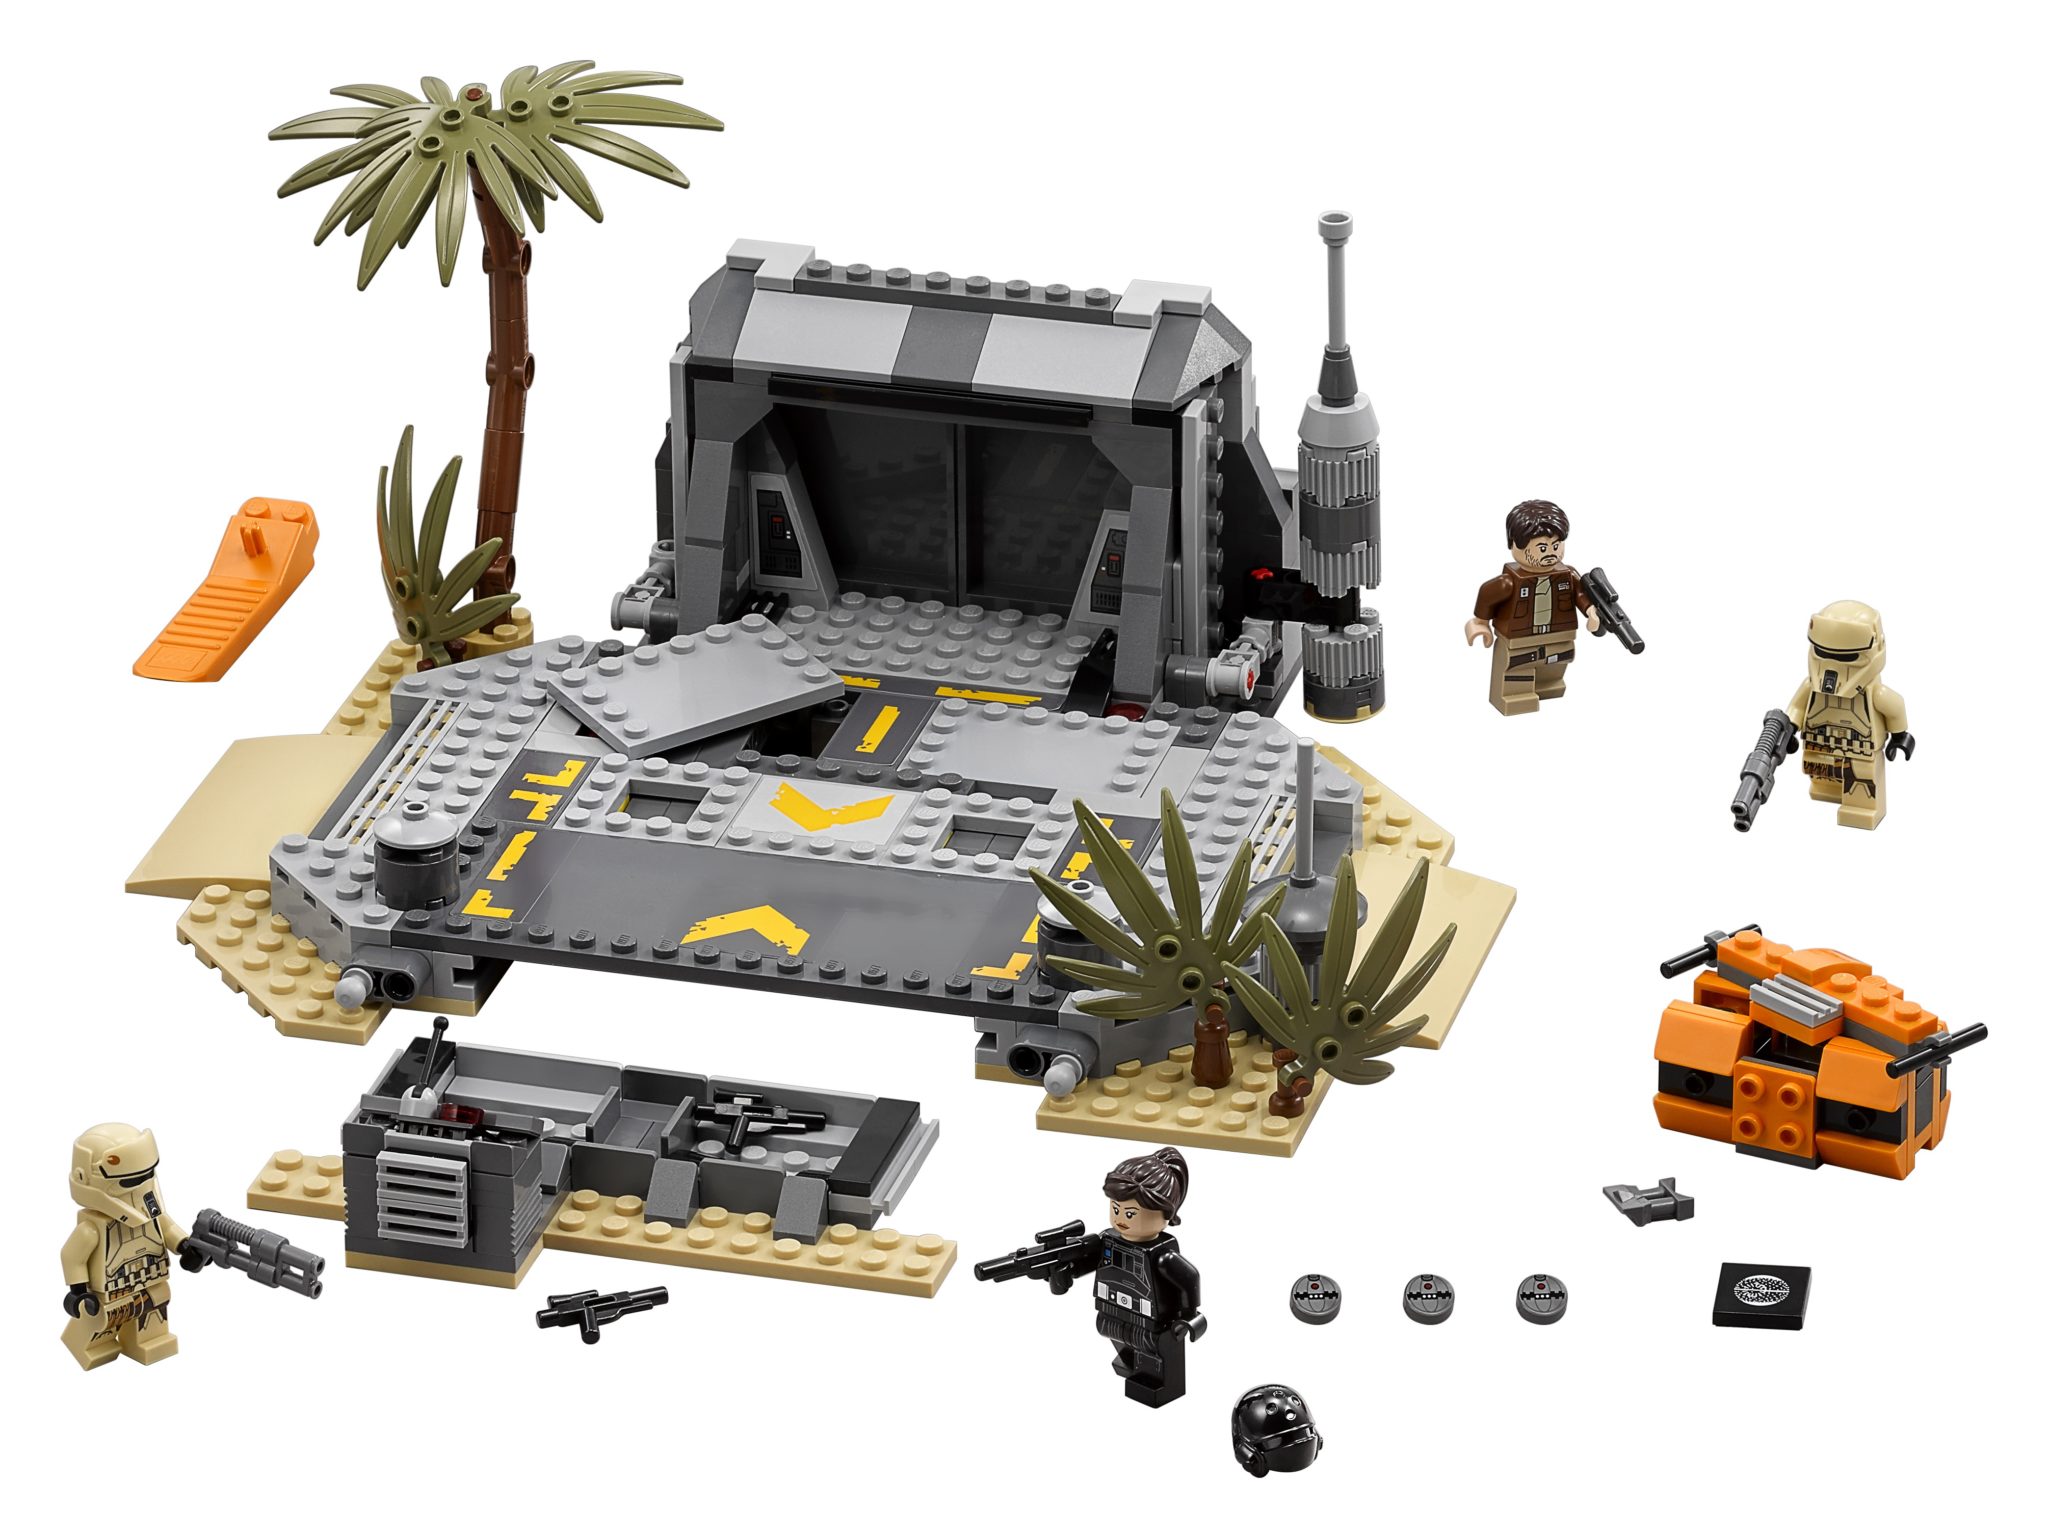 Cool New Toys Unveiled at Toy Fair 2017- LEGO Star Wars Rogue One 75171_Battle of Scarif